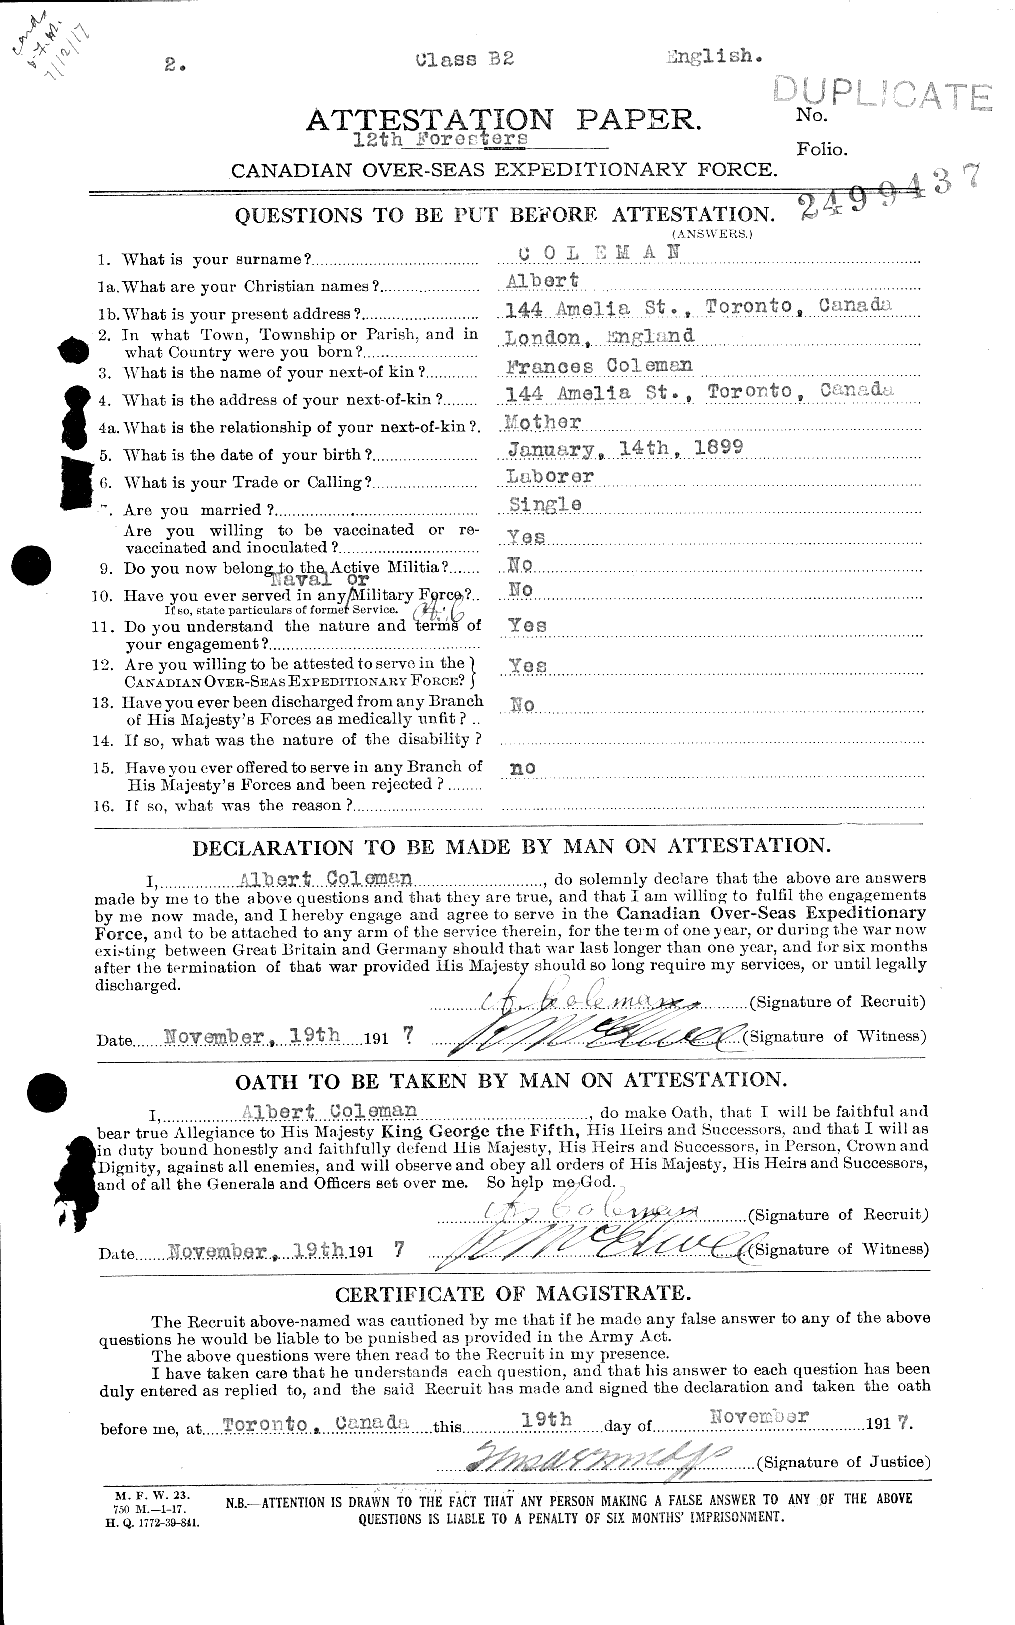 Personnel Records of the First World War - CEF 028047a